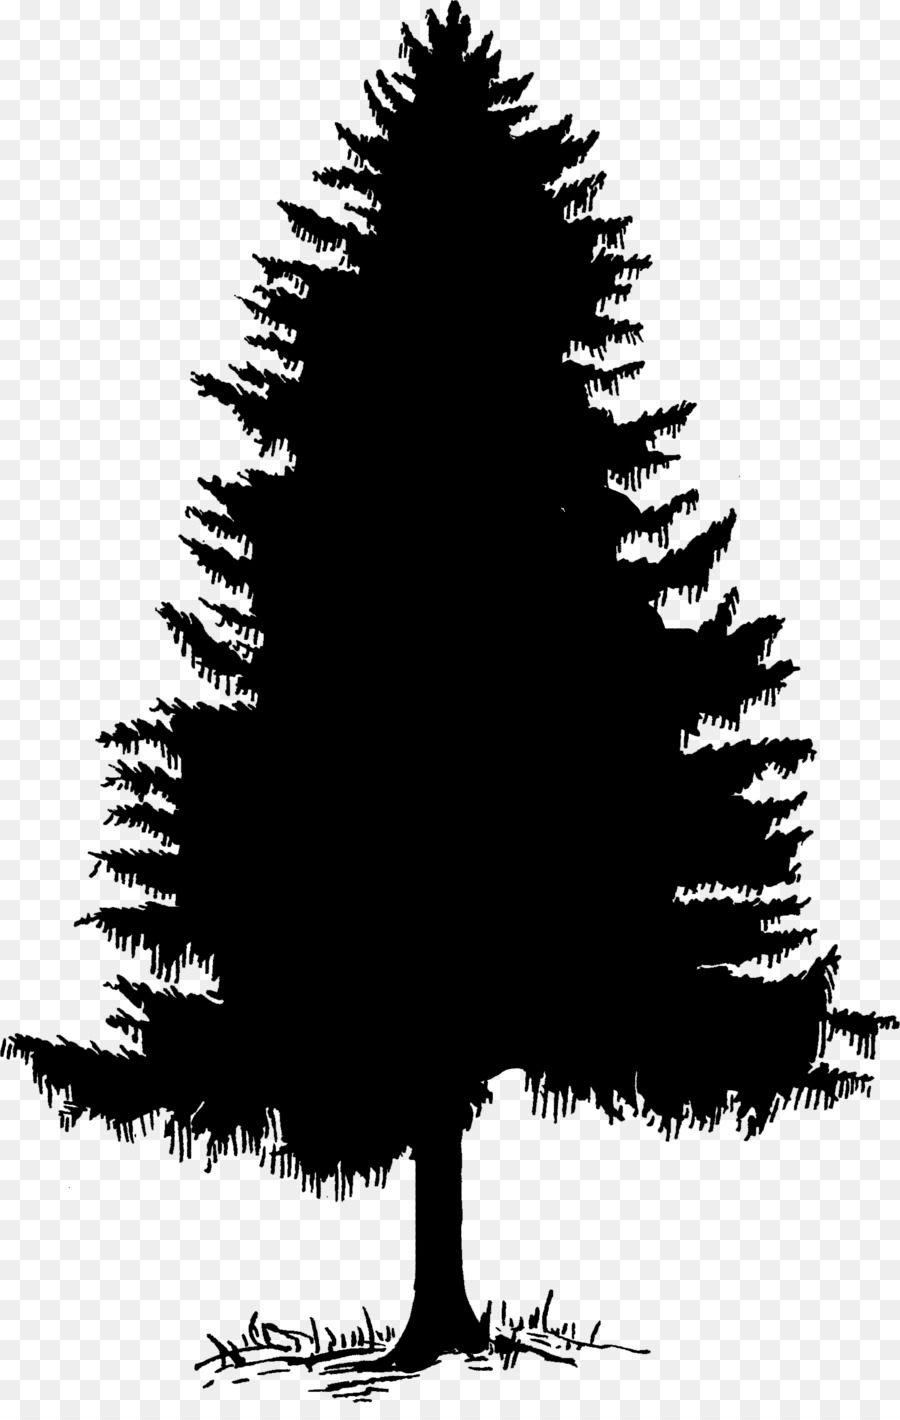 Clip art Tree Silhouette Cedar Pine -  png download - 1668*2601 - Free Transparent Tree png Download.